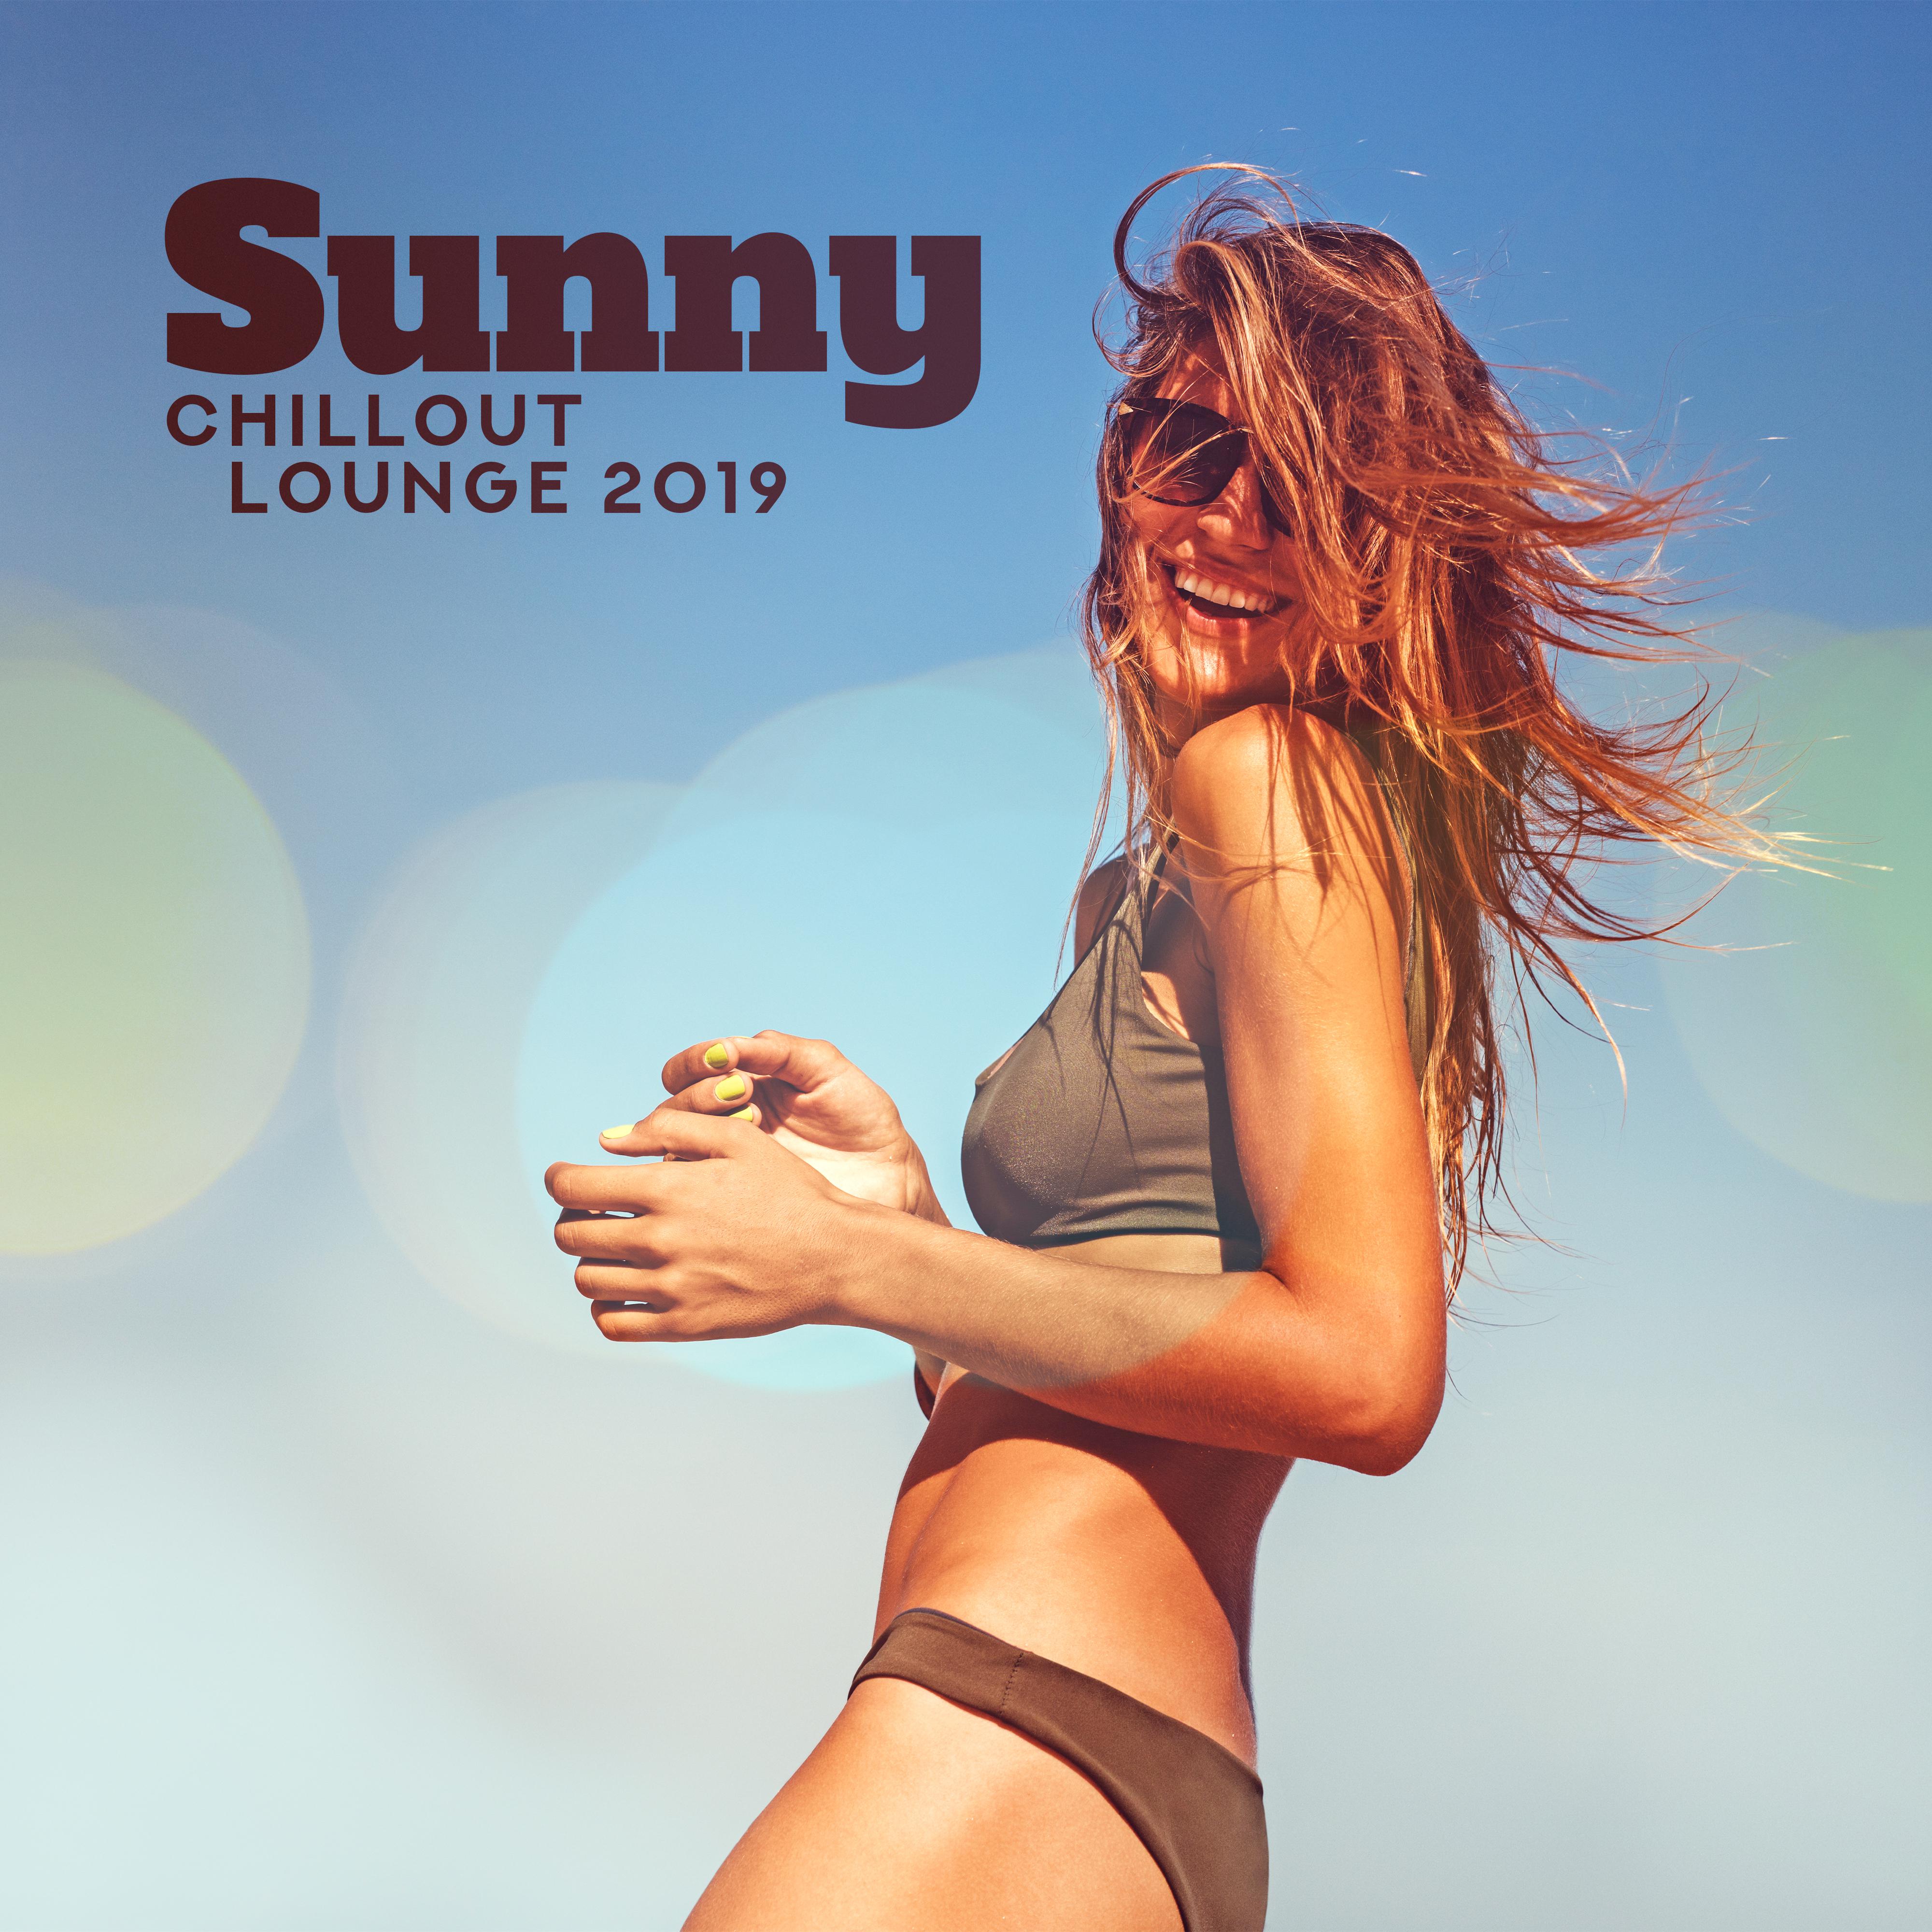 Sunny Chillout Lounge 2019: Ibiza Relaxation, Holiday Music & Relax, Chillout Vibes, Beach Chill, Lounge Bar Beats, Ambient Chill, Zen